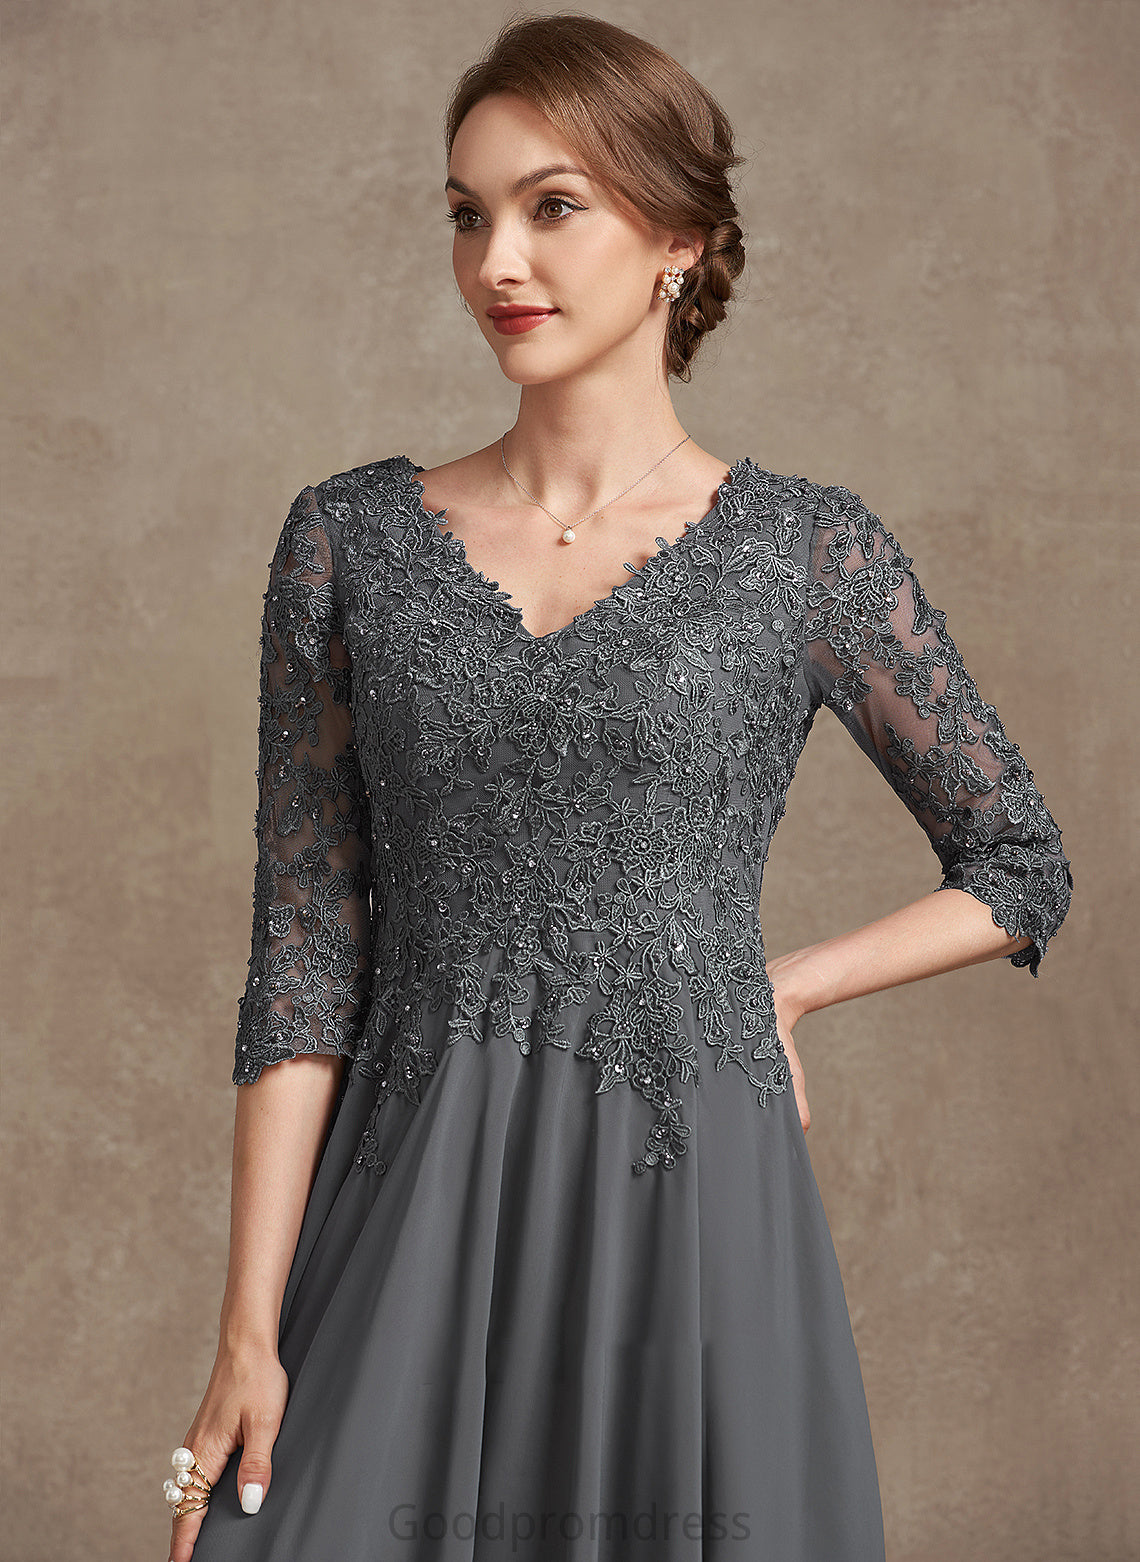 A-Line Tea-Length Lace Dress Chiffon V-neck Beading the Mother of the Bride Dresses of Sequins Bride Ellen Mother With